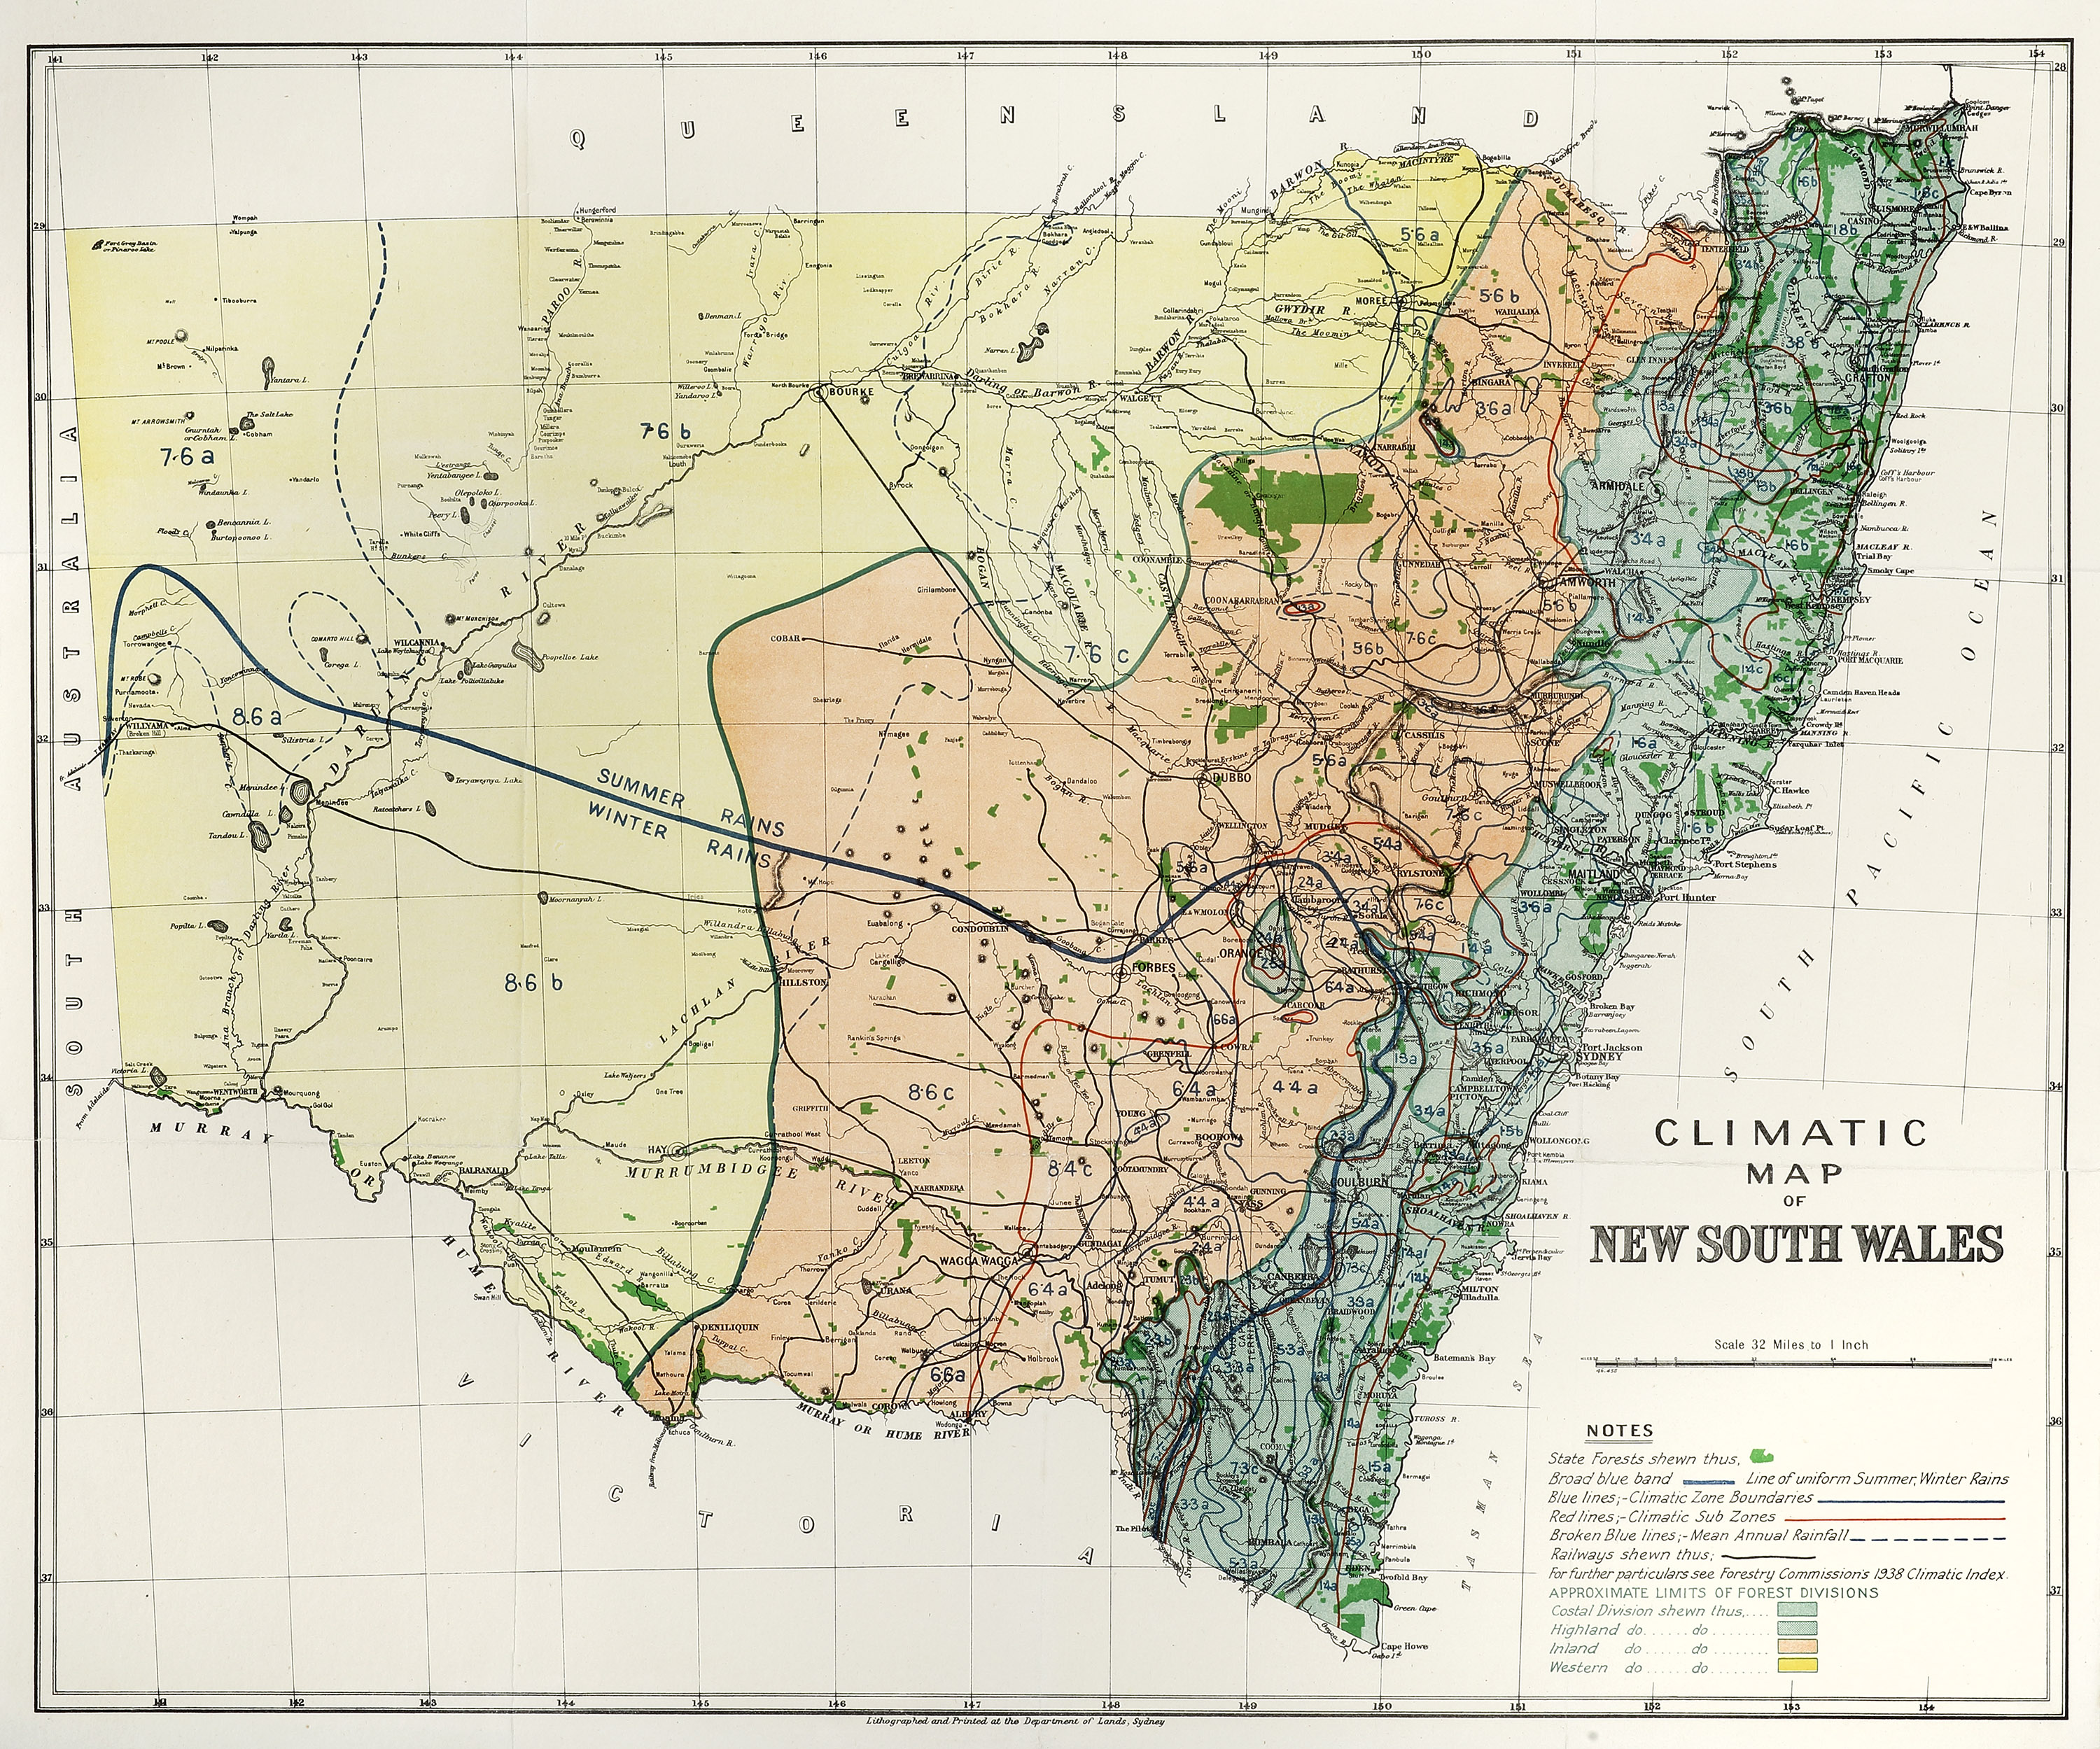 Climatic Map of New South Wales - Vintage Map from 1938